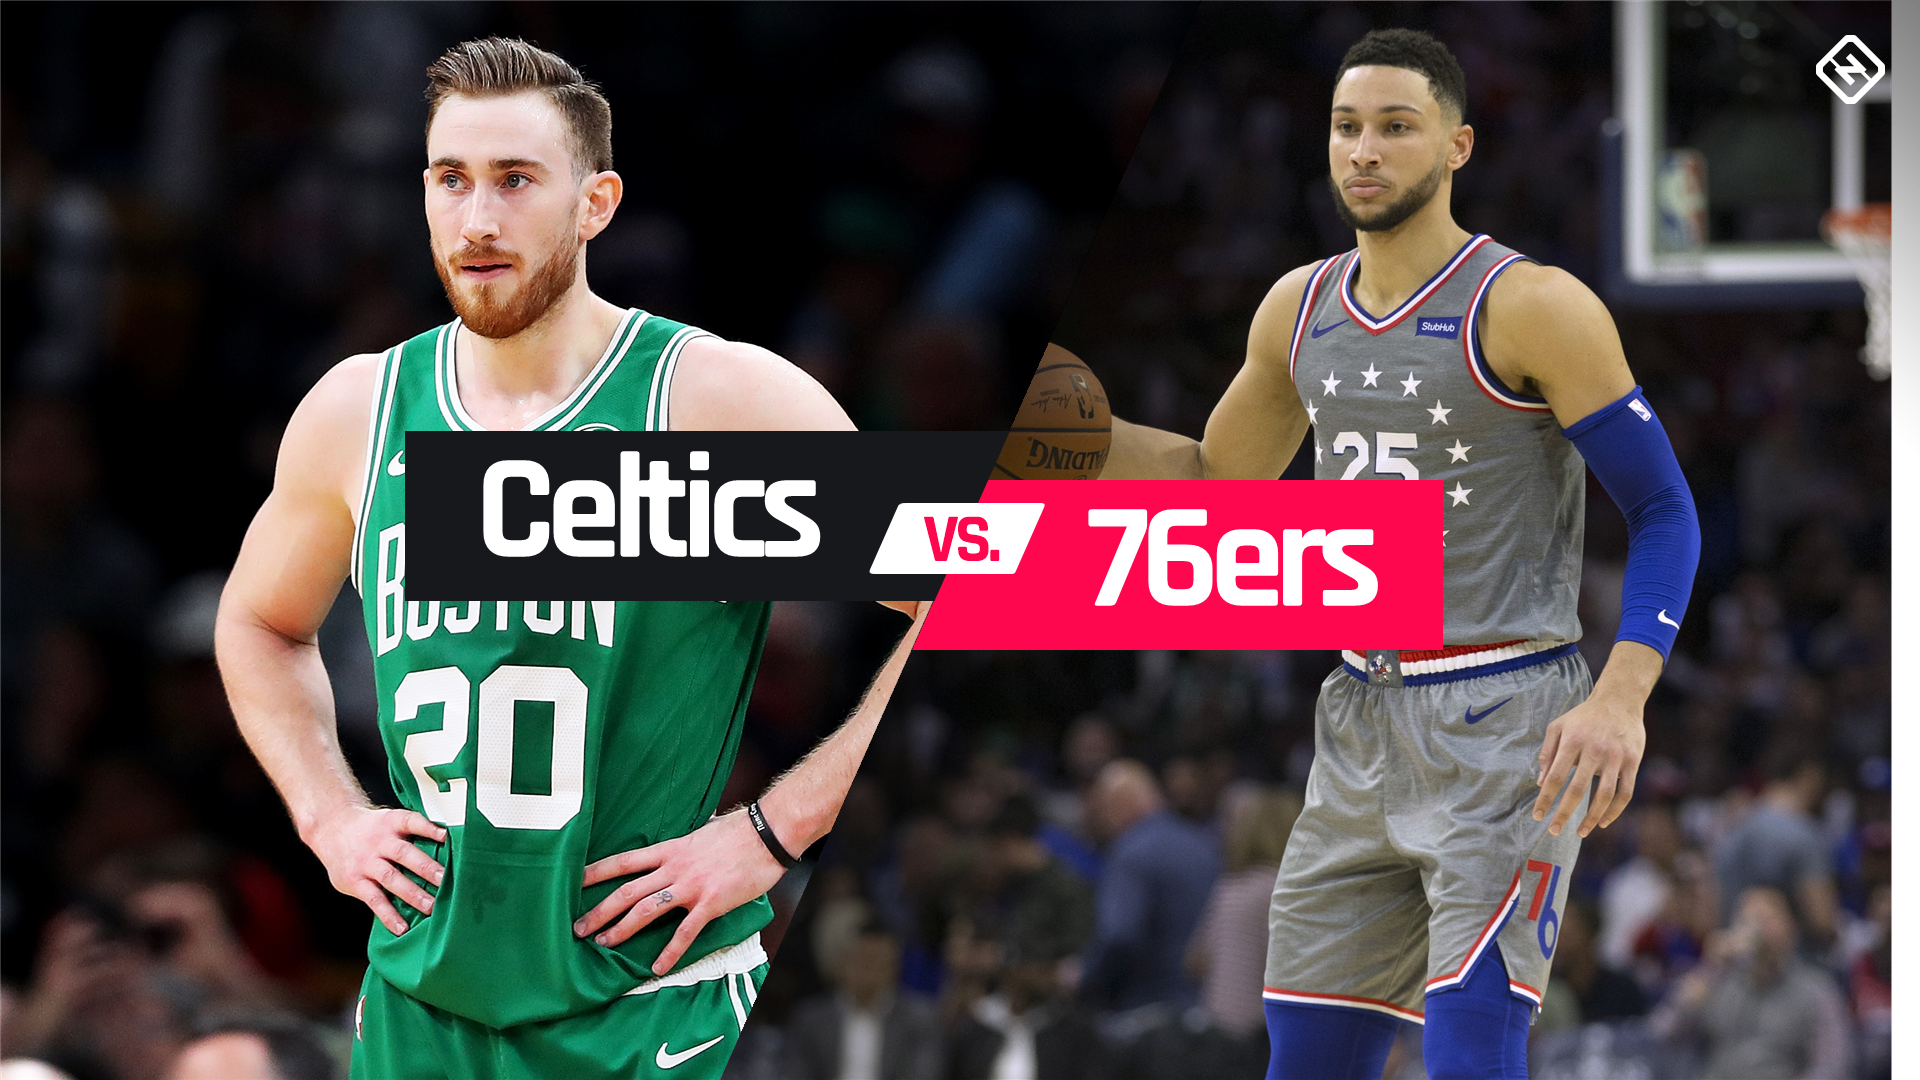 Celtics vs. 76ers: Time, TV channel, how to live stream | NBA | Sporting News1920 x 1080